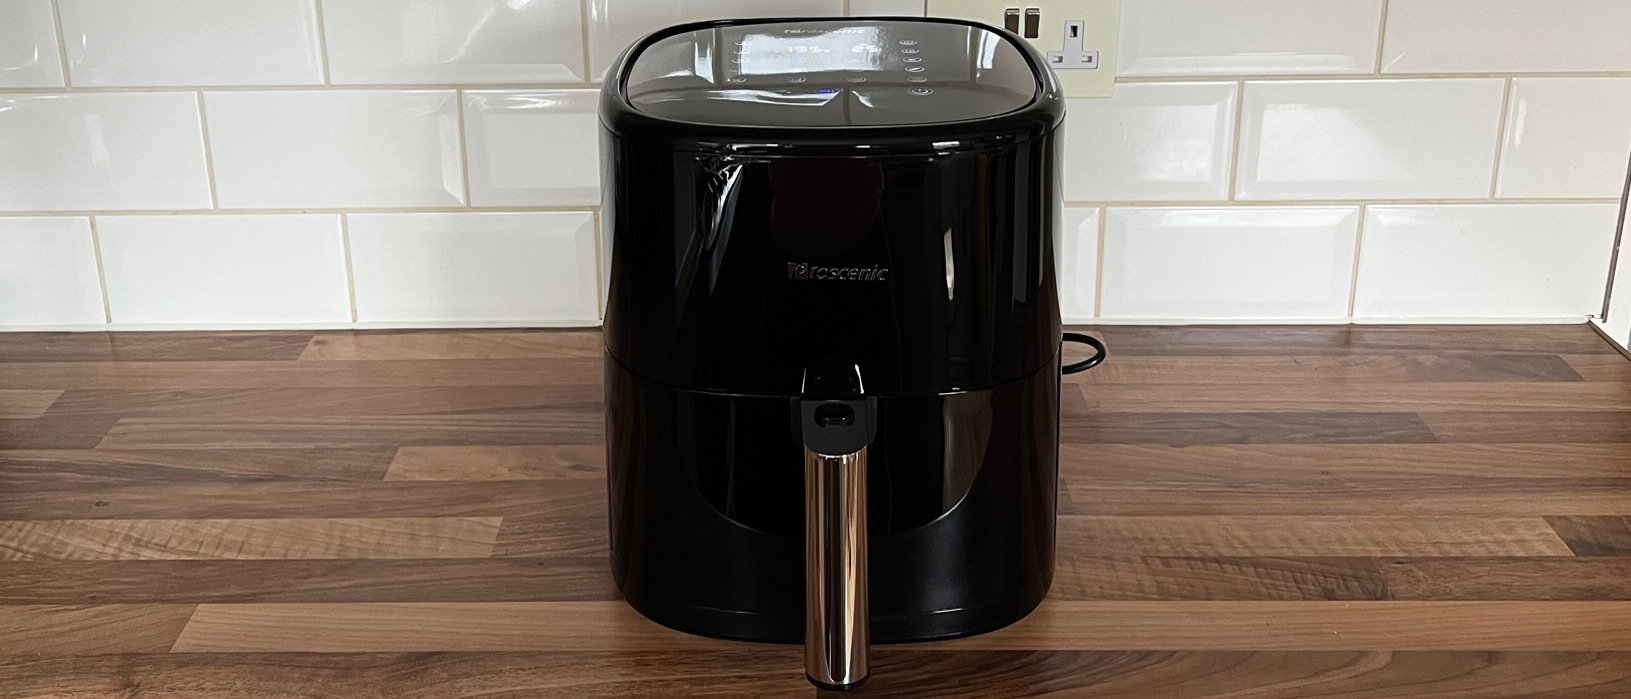 Proscenic T21 Smart Air Fryer review